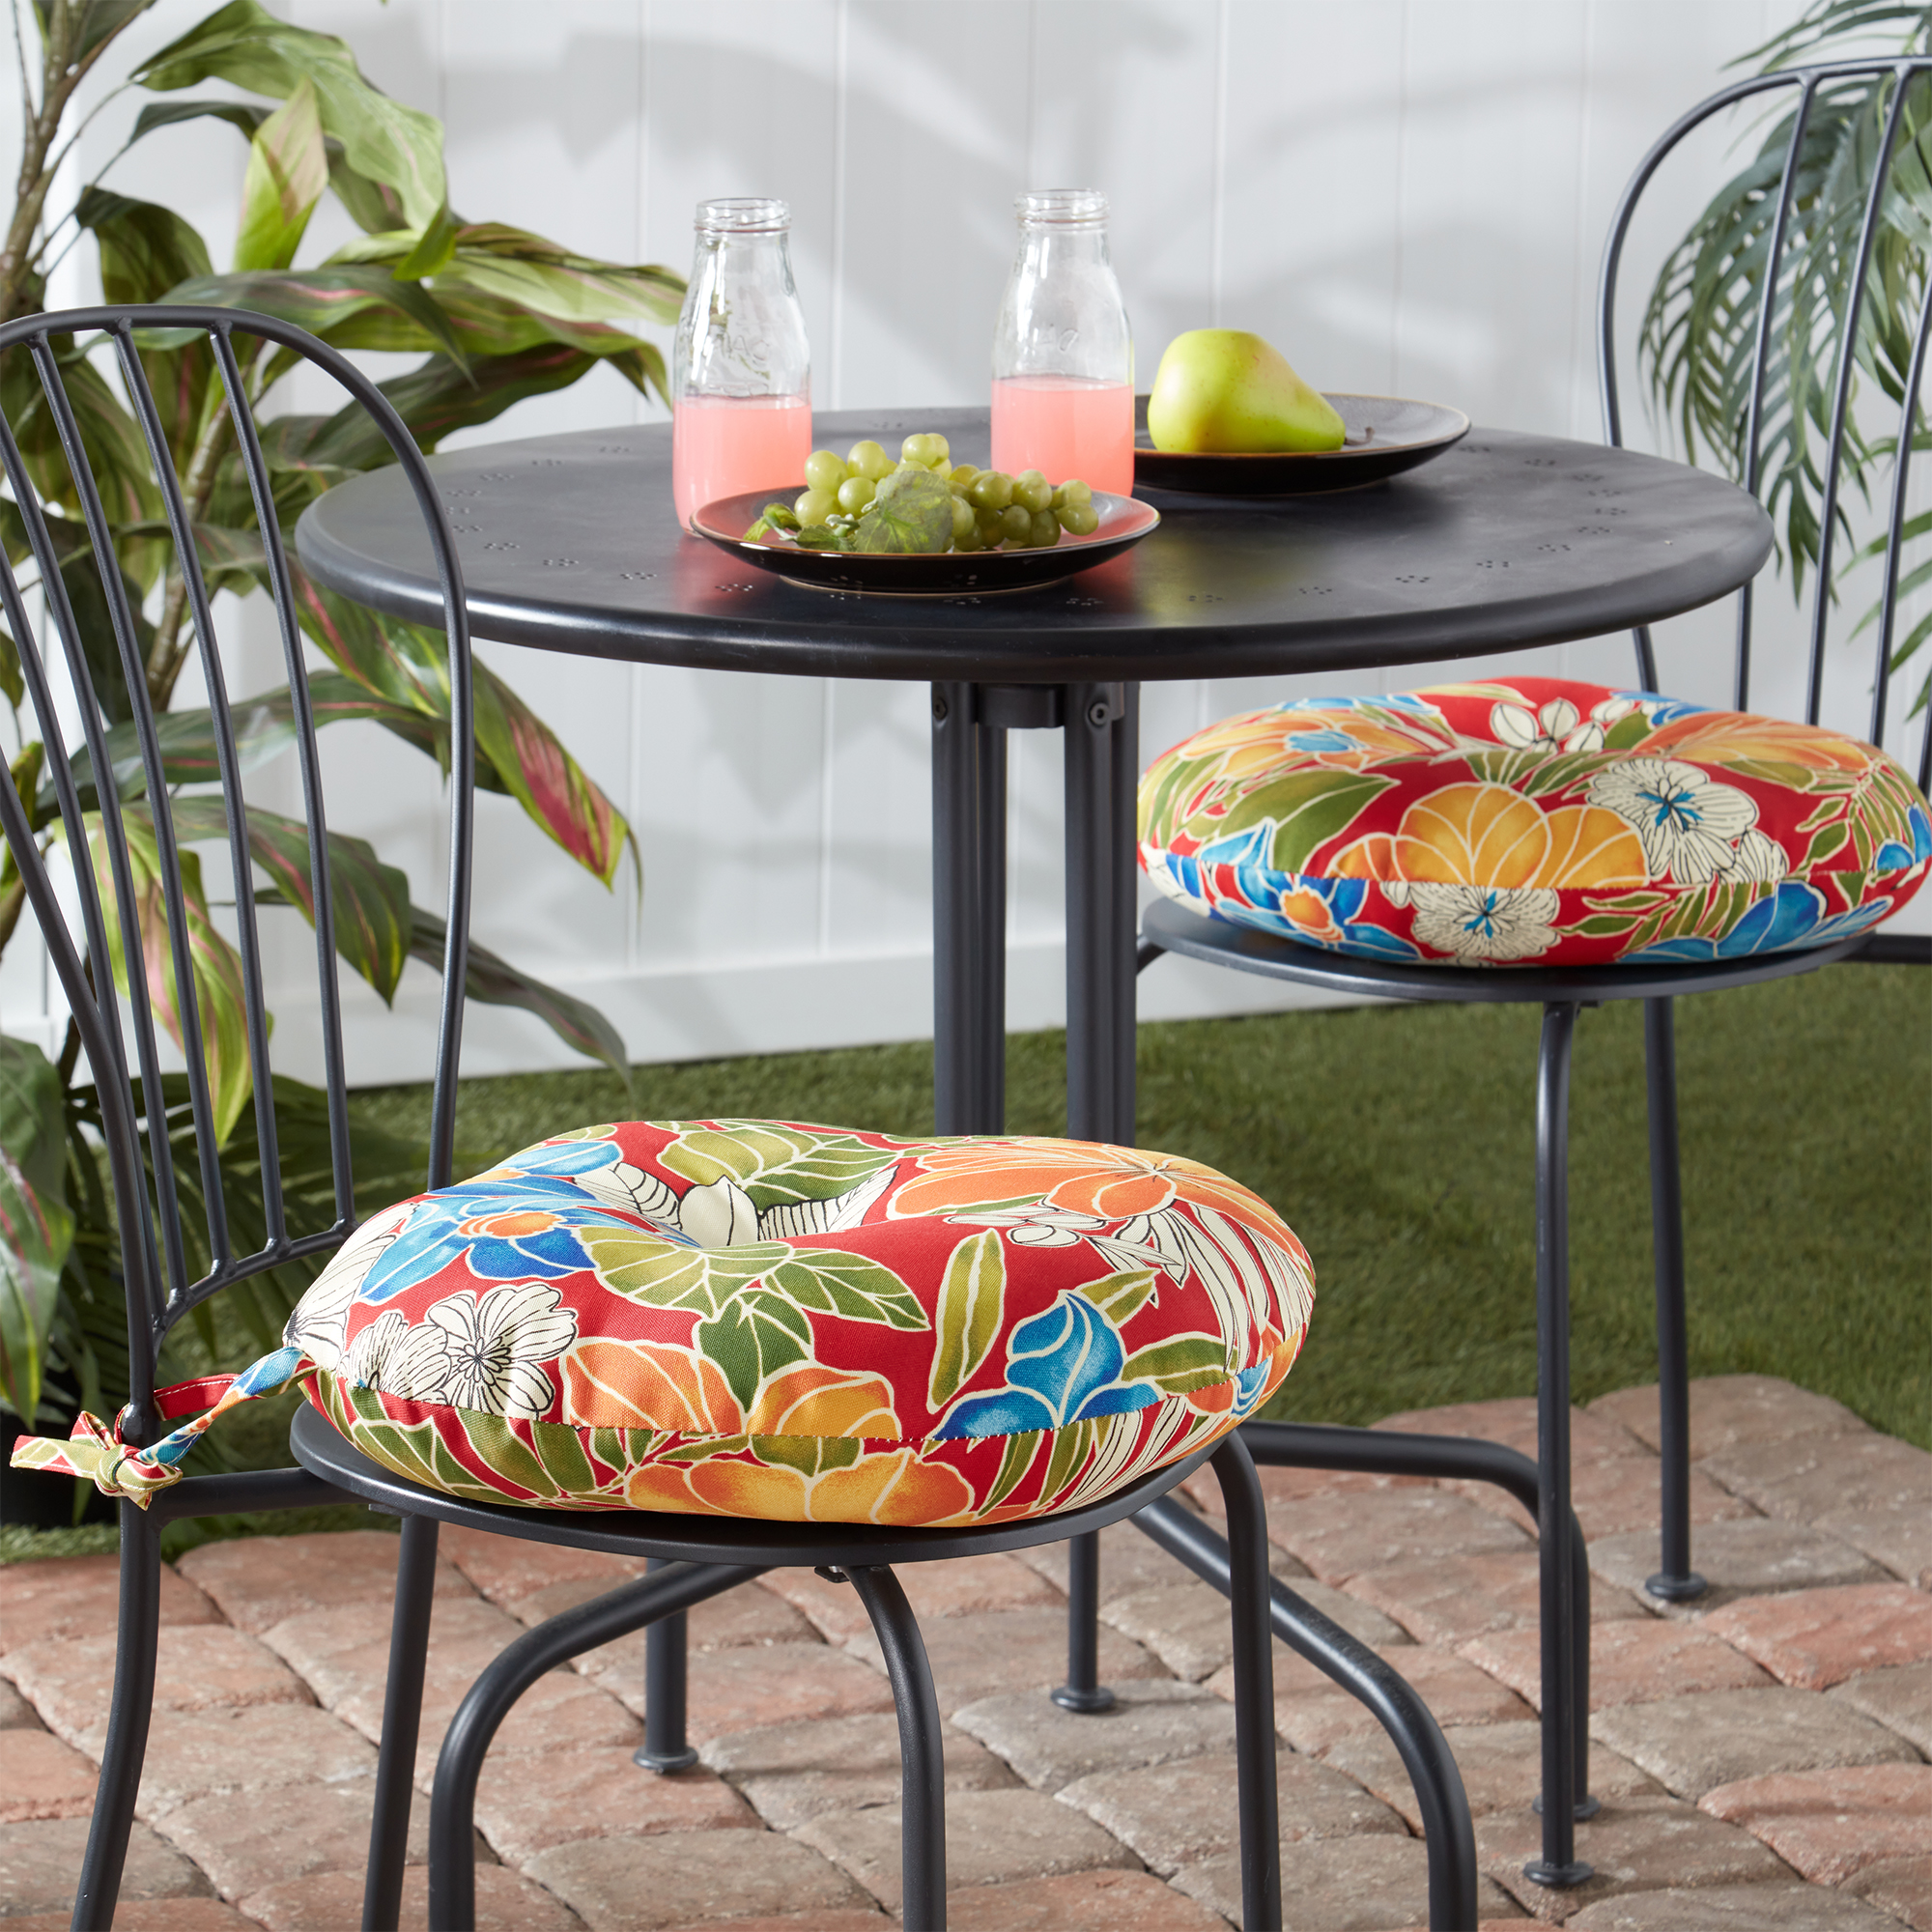 Greendale Home Fashions Aloha Red Floral 15 in. Round Outdoor Reversible Bistro Seat Cushion (Set of 2) - image 2 of 5